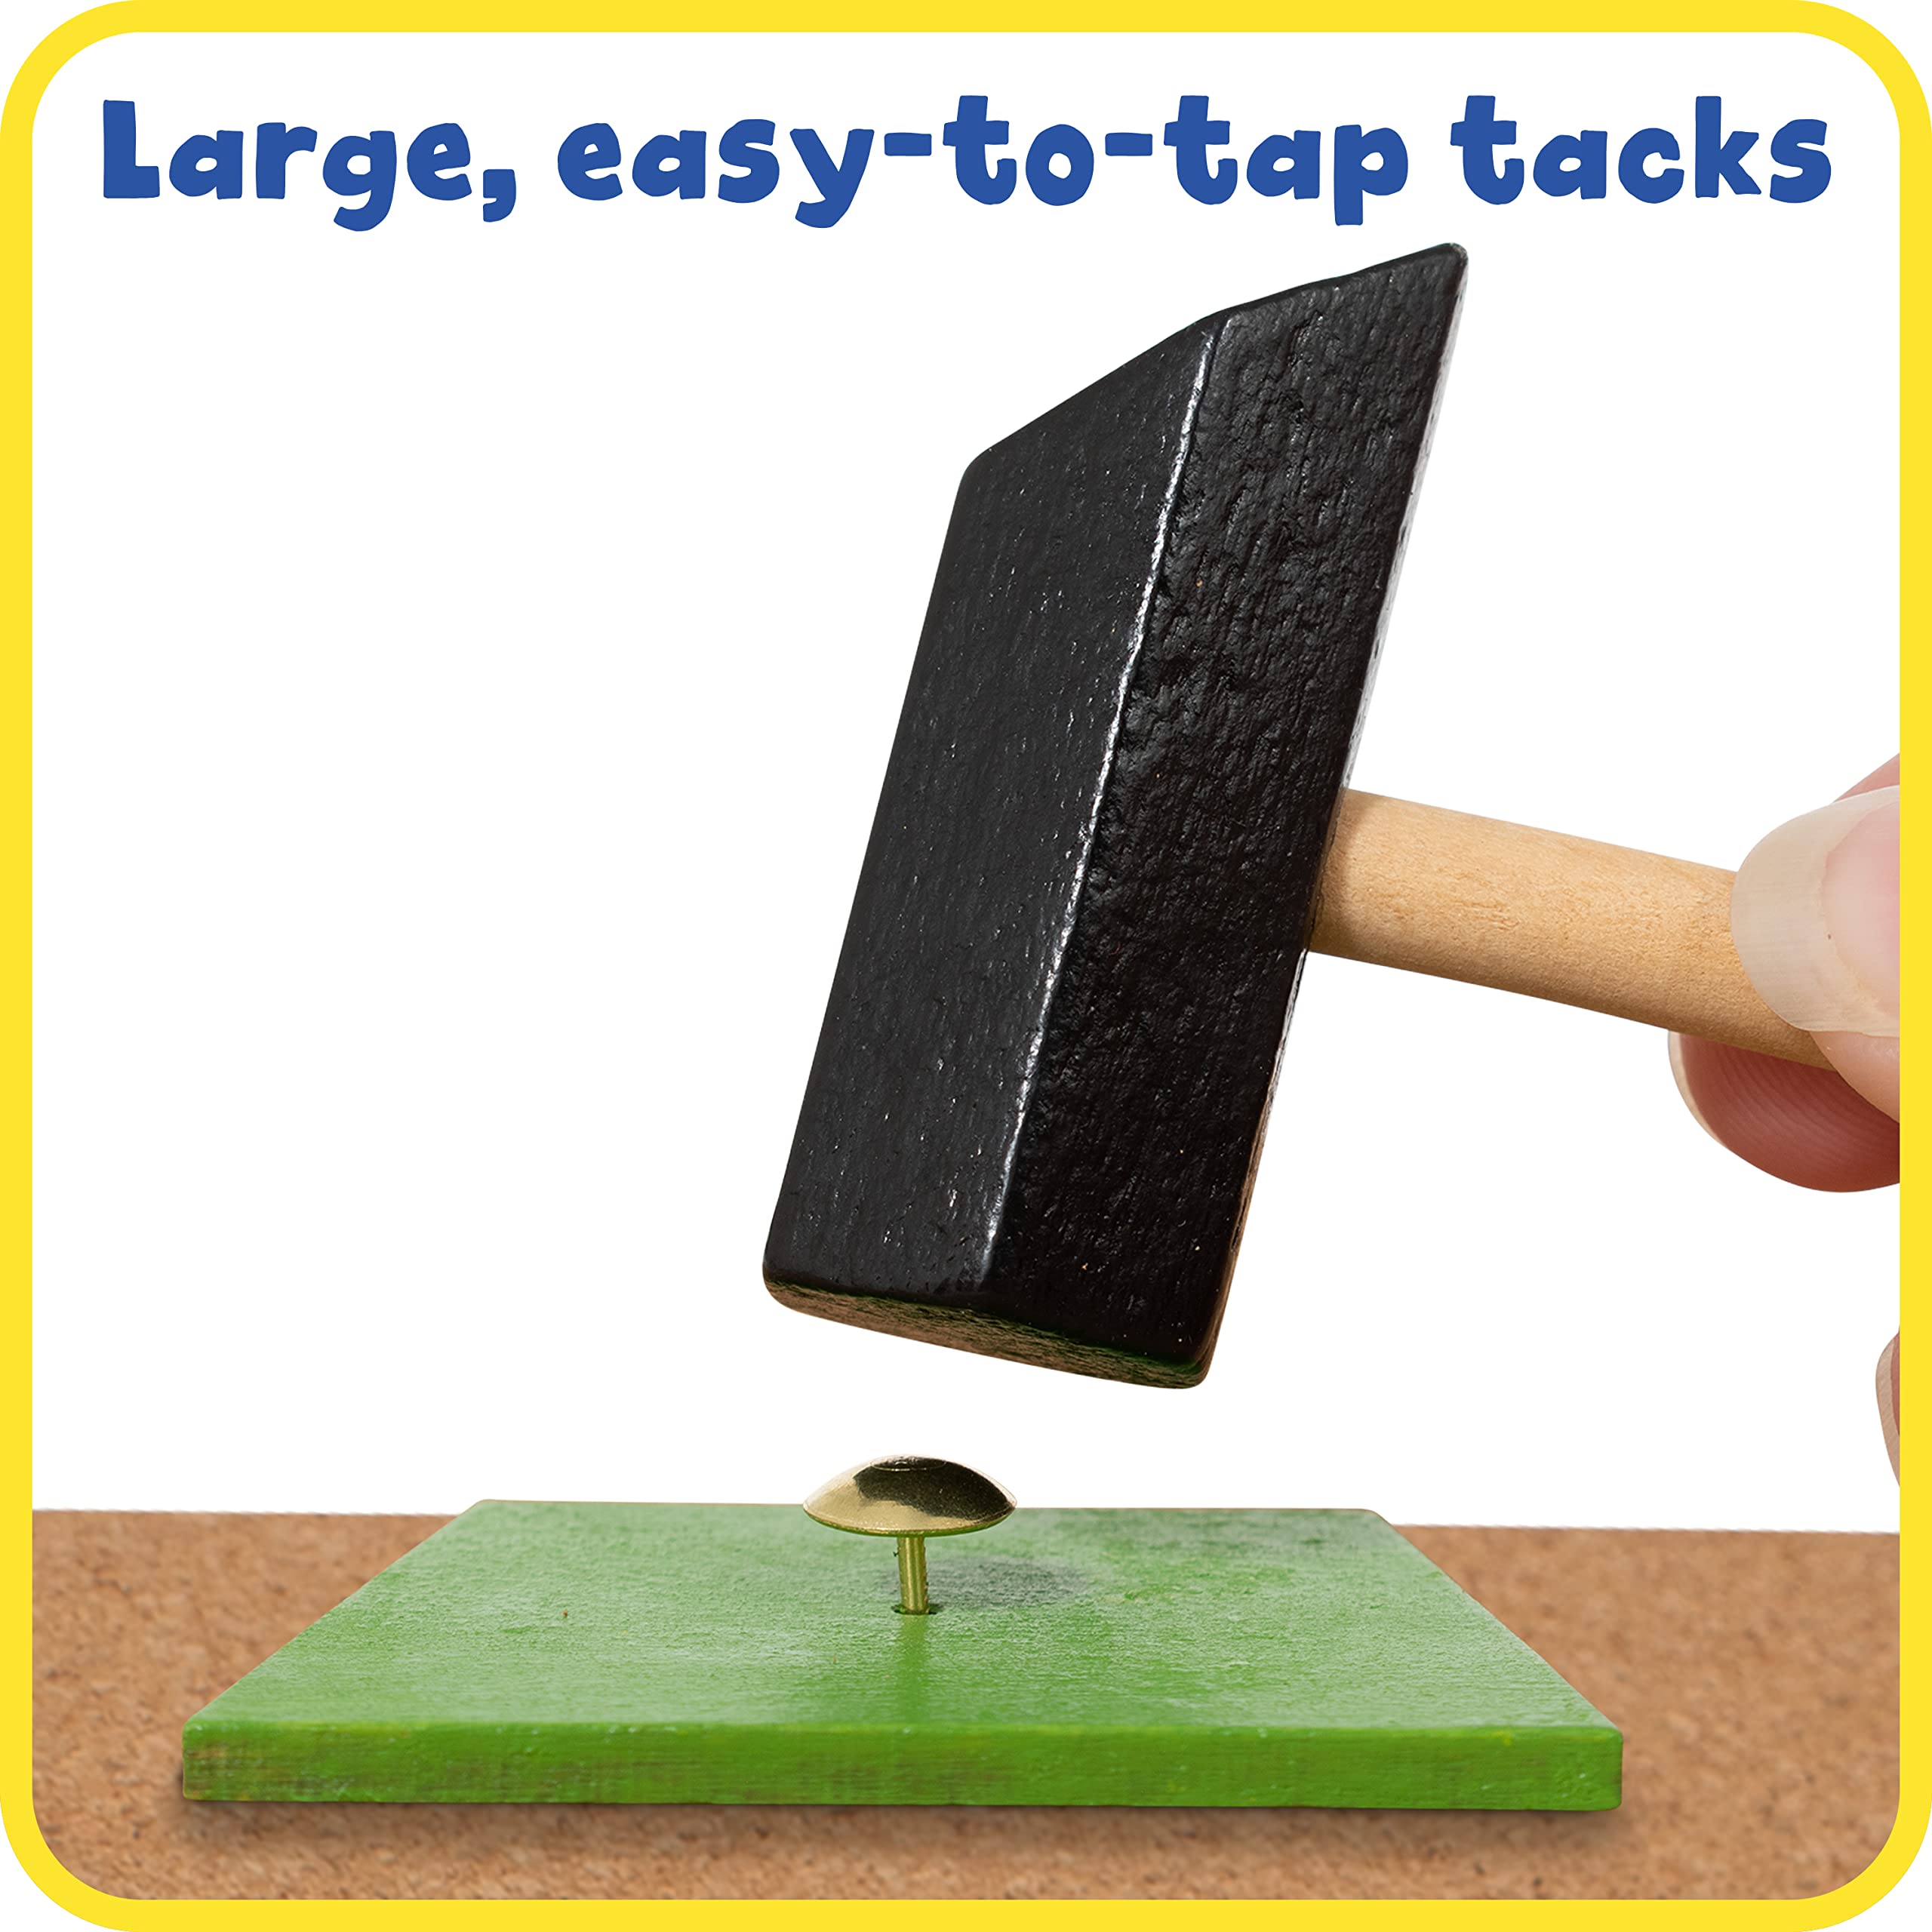 READY 2 LEARN Tack A Tile - Wooden Hammer Toy for Kids Aged 4 and up - 100 Shapes - Big Corkboard - Kid-Friendly Tacks - Foster Imagination, Fine Motor Skills and Reasoning